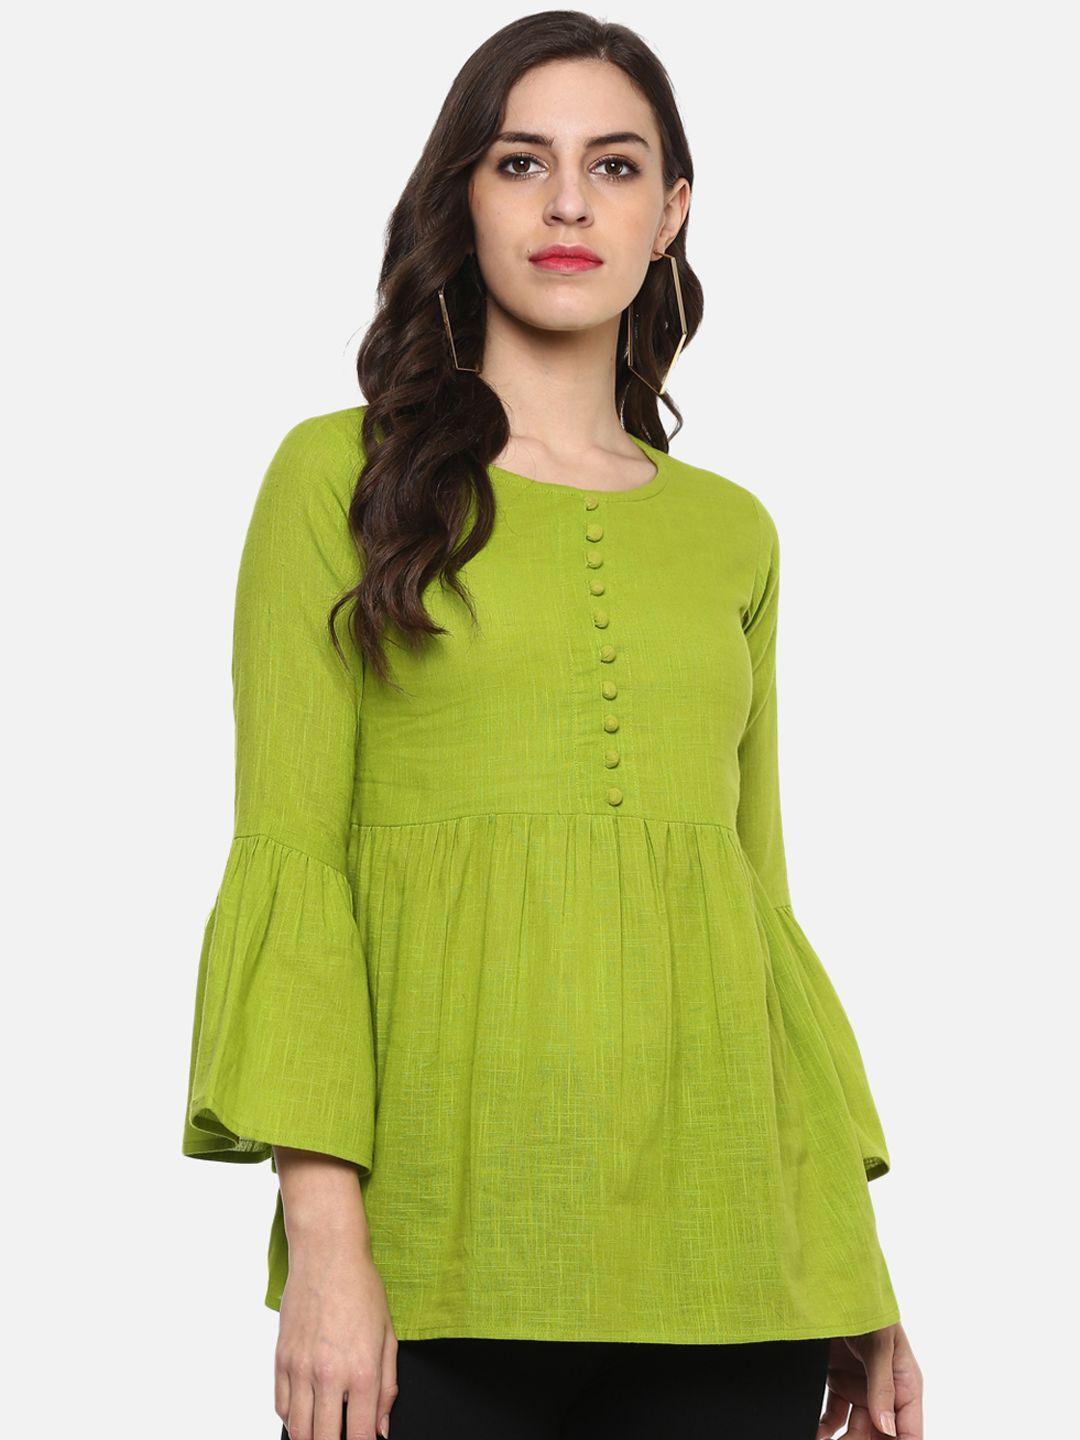 yash-gallery-women-green-solid-empire-top